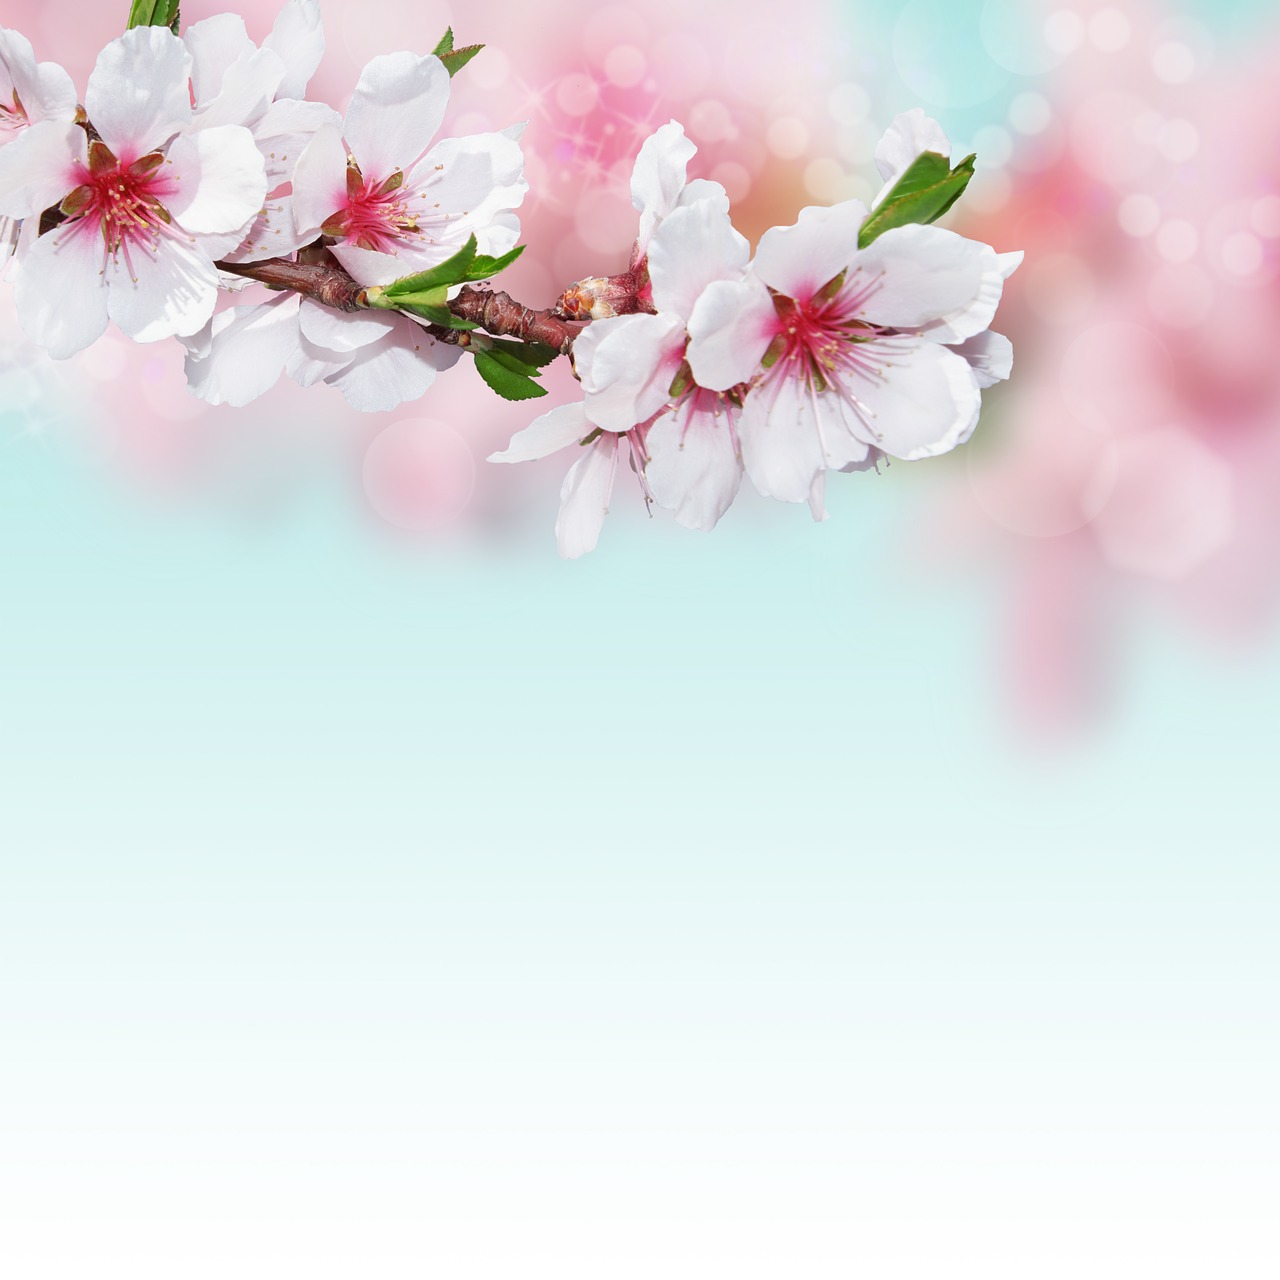 a close up of a branch of a tree with pink flowers, a pastel, background is white and blank, shiny background, peaches, background image